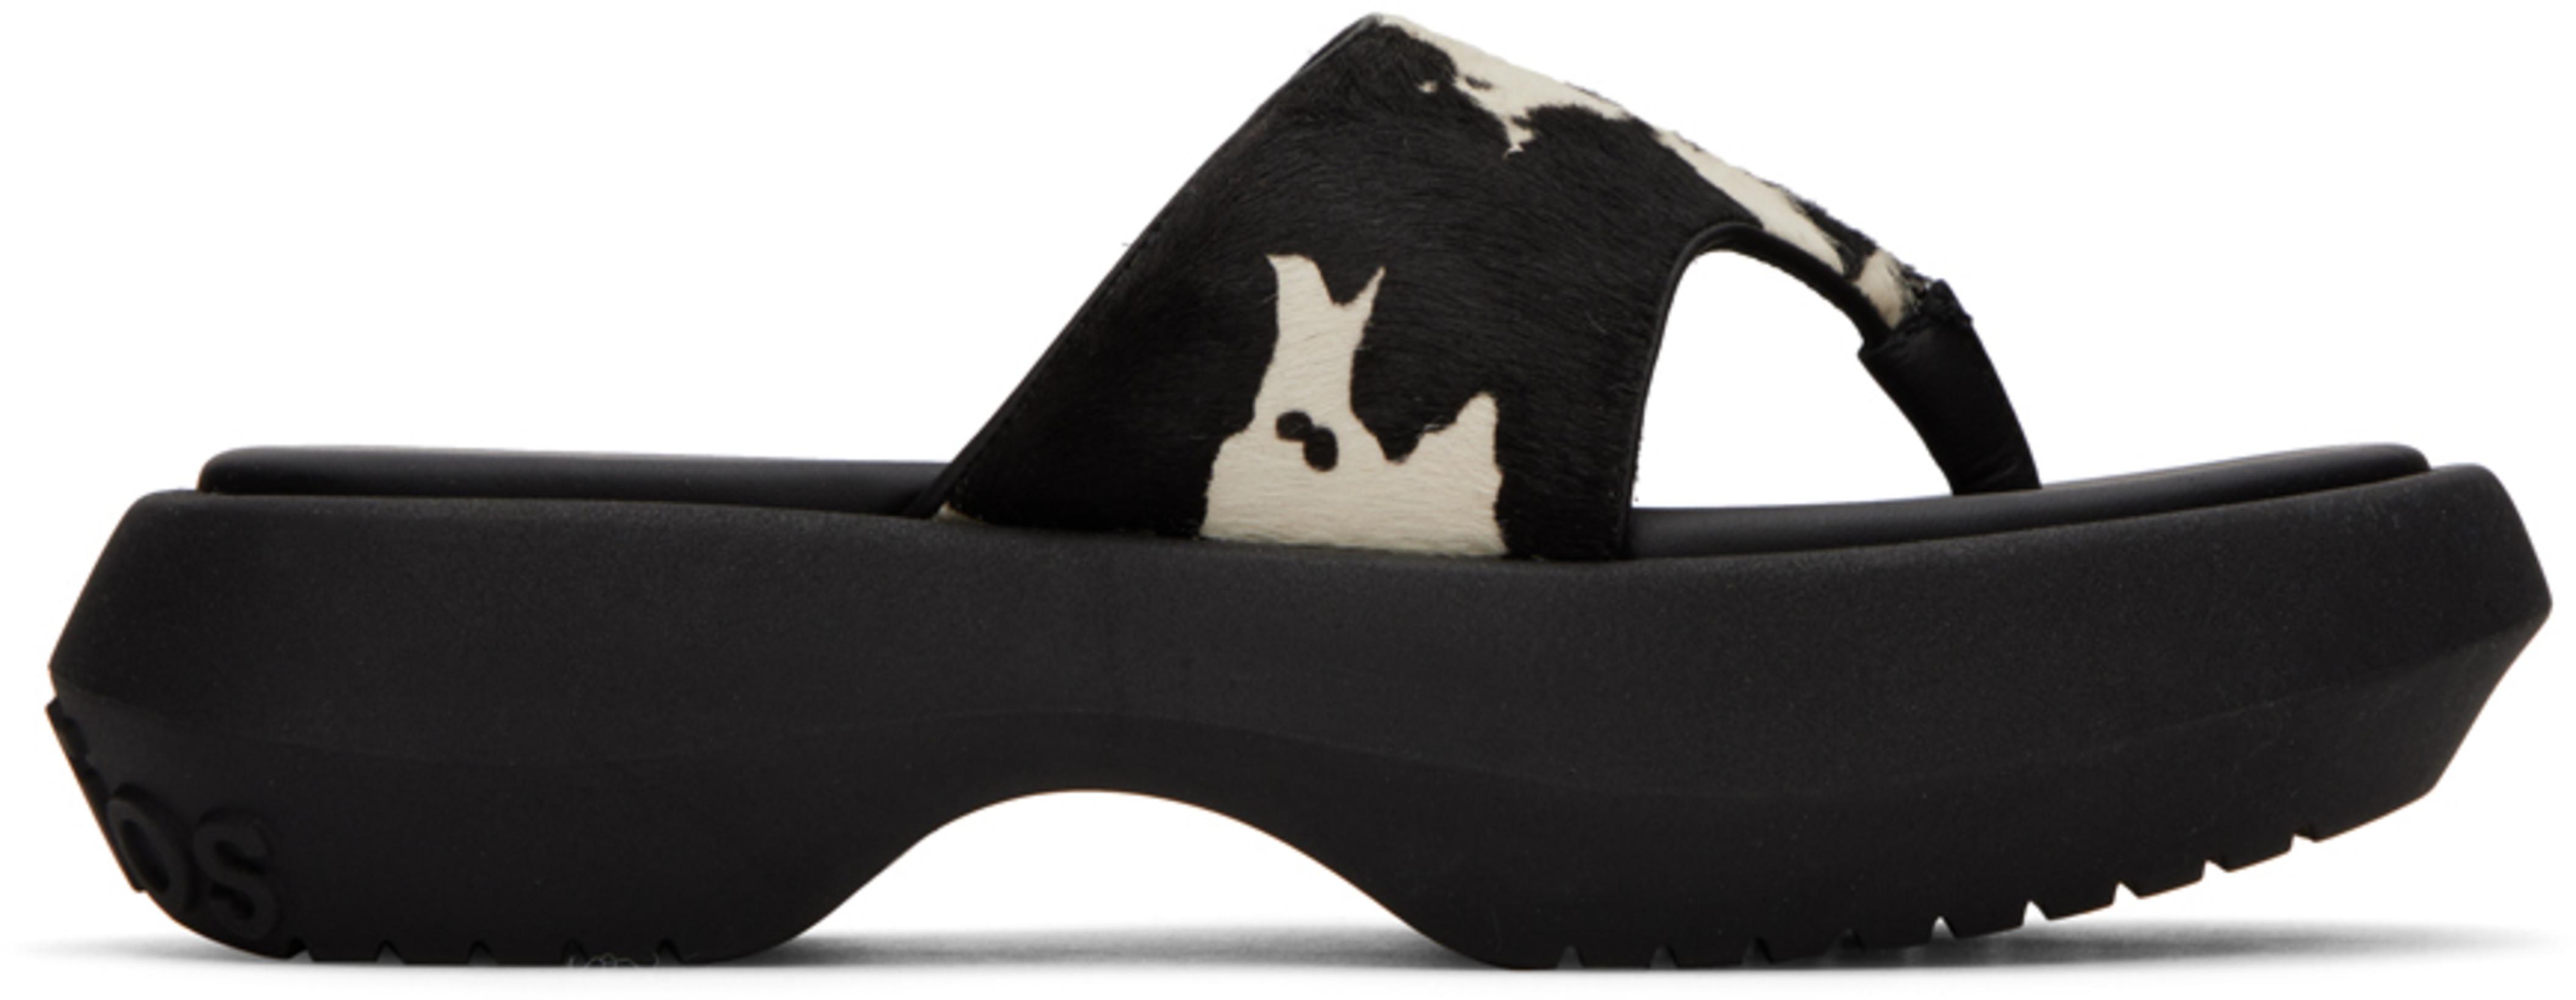 Black & White Printed Leather Sandals by ACNE STUDIOS